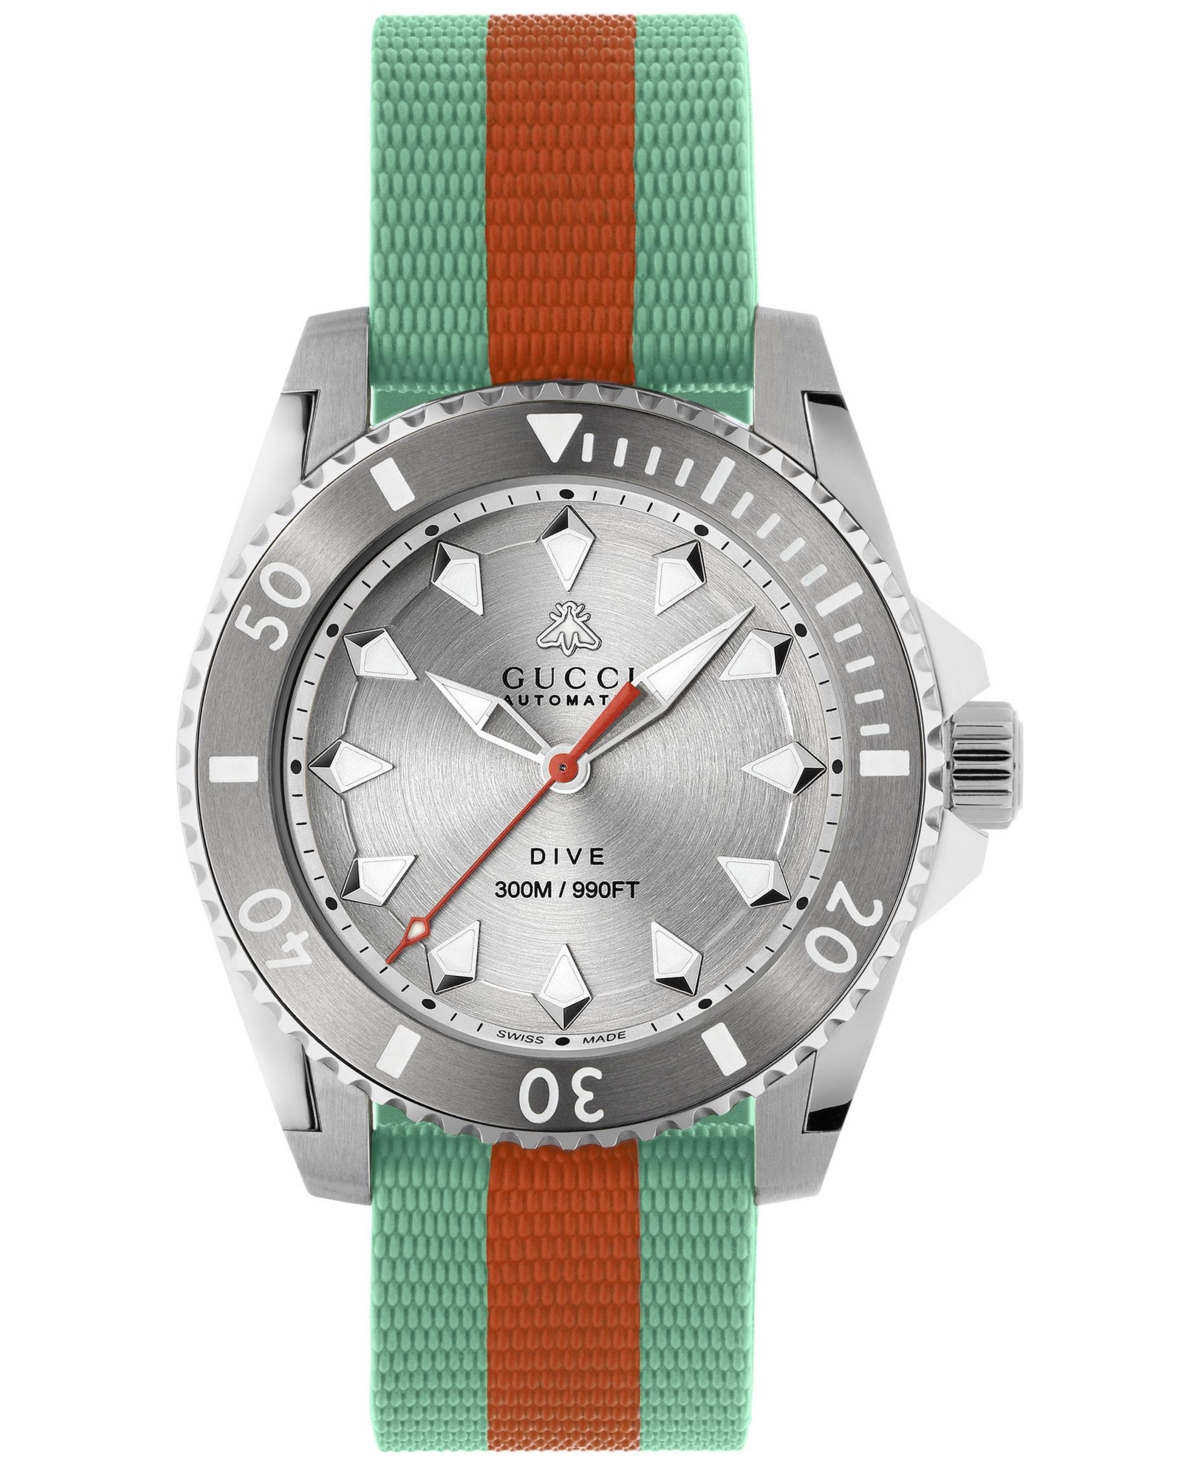 Gucci Men's Swiss Automatic Dive Red & Green Rubber Strap Watch 40mm In Stainless Steel,green Red Green Strap